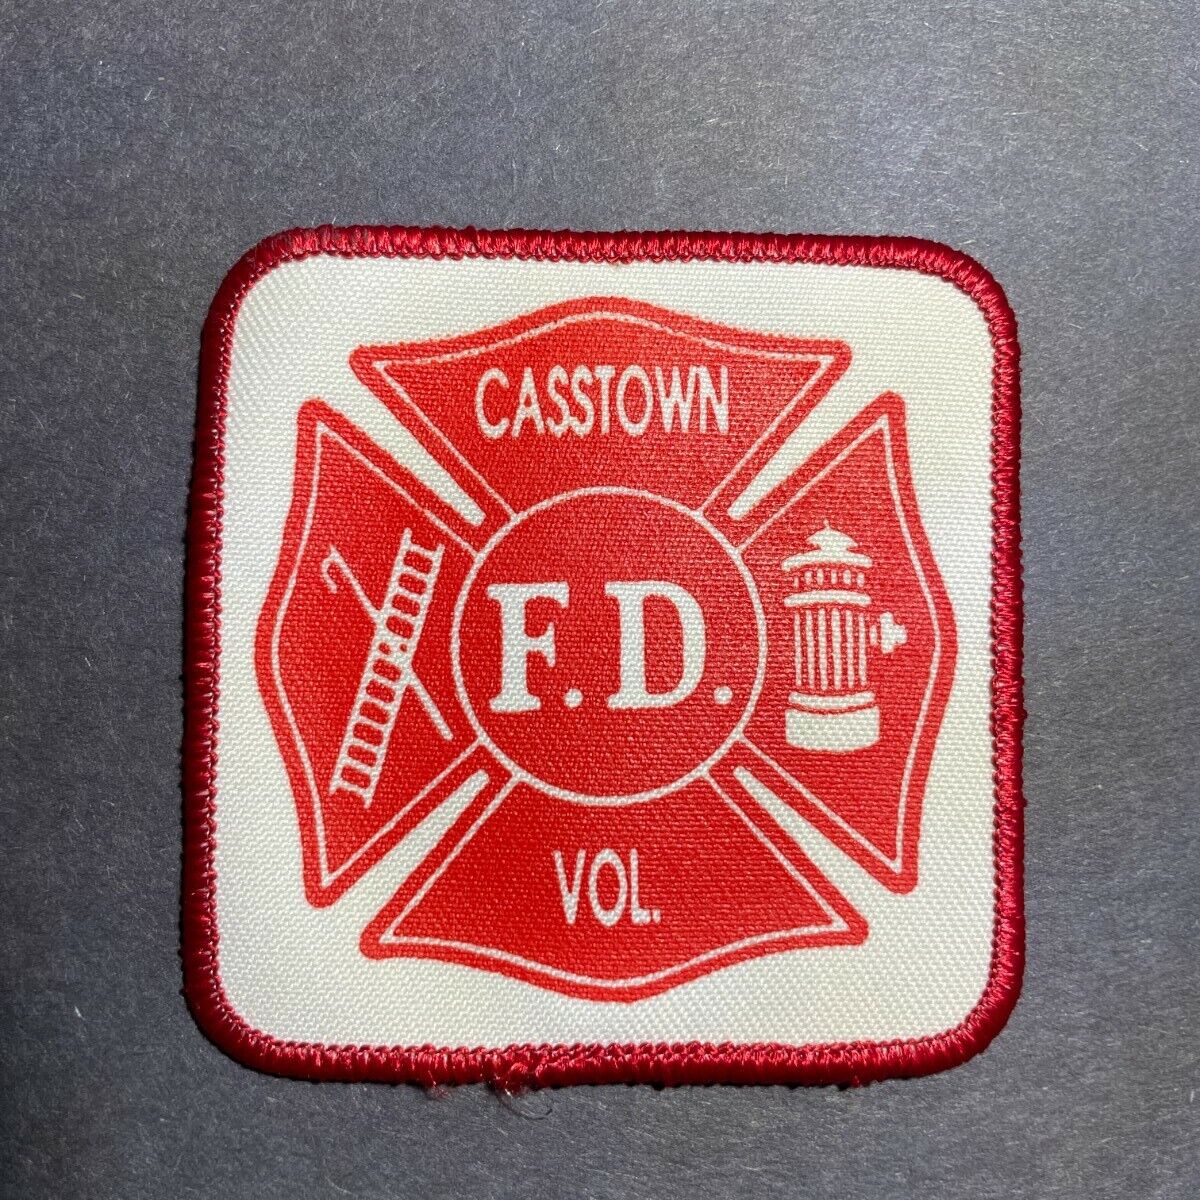 CITY OF CASSTOWN OHIO VOLUNTEER FIRE DEPARTMENT PATCH— AUTHENTIC, GOOD CONDITION